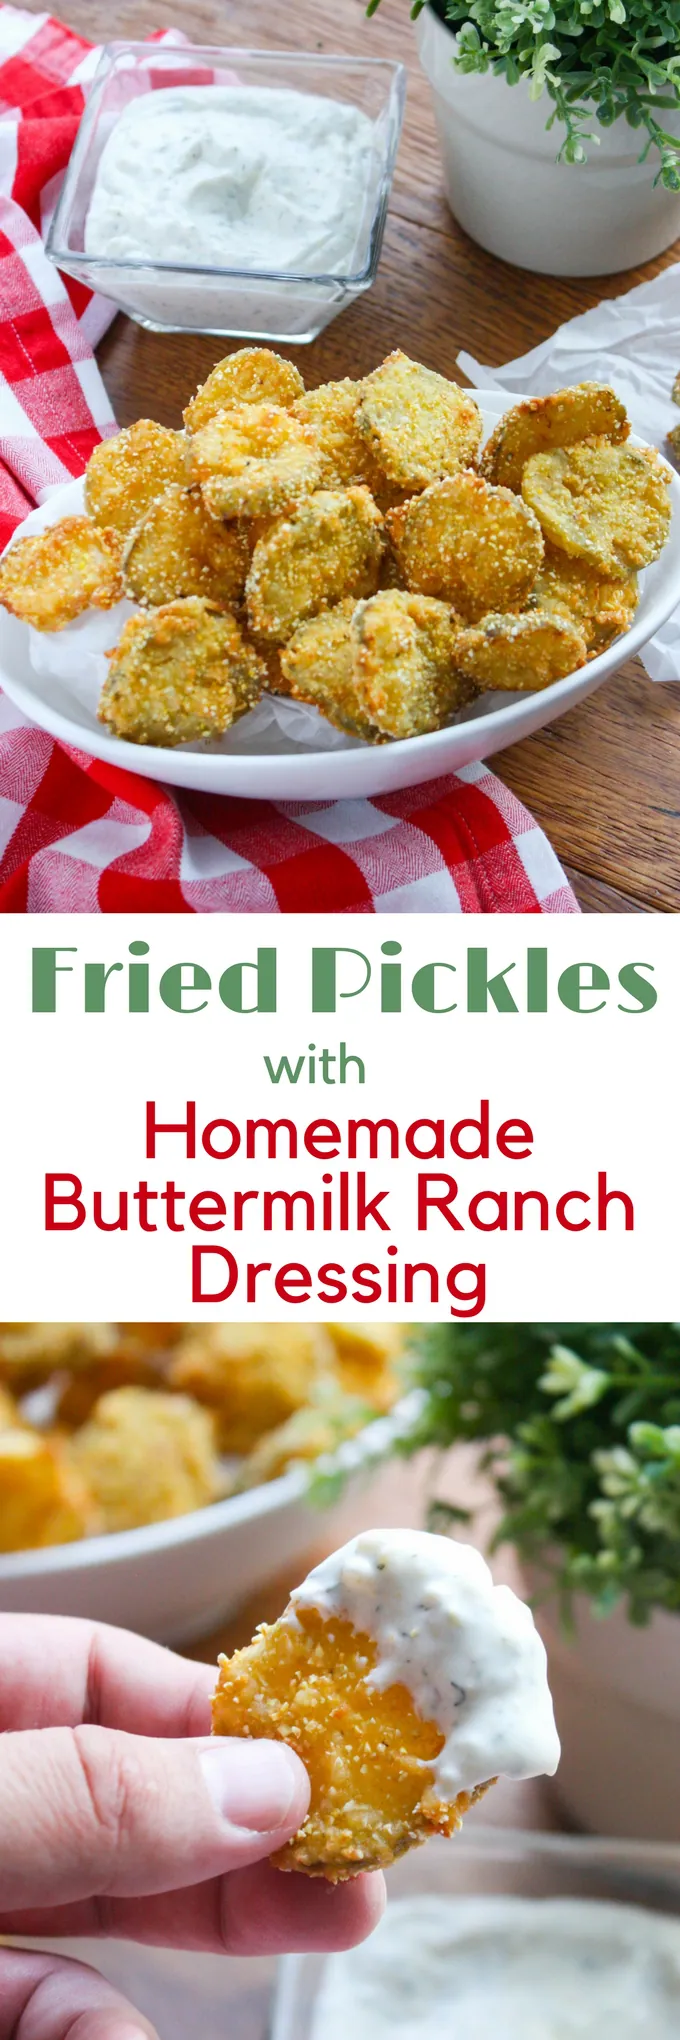 Fried Pickles with Homemade Buttermilk Ranch Dressing make a fun and delicious snack for any get together! You'll love these fried pickles dunked in a tasty dressing! 